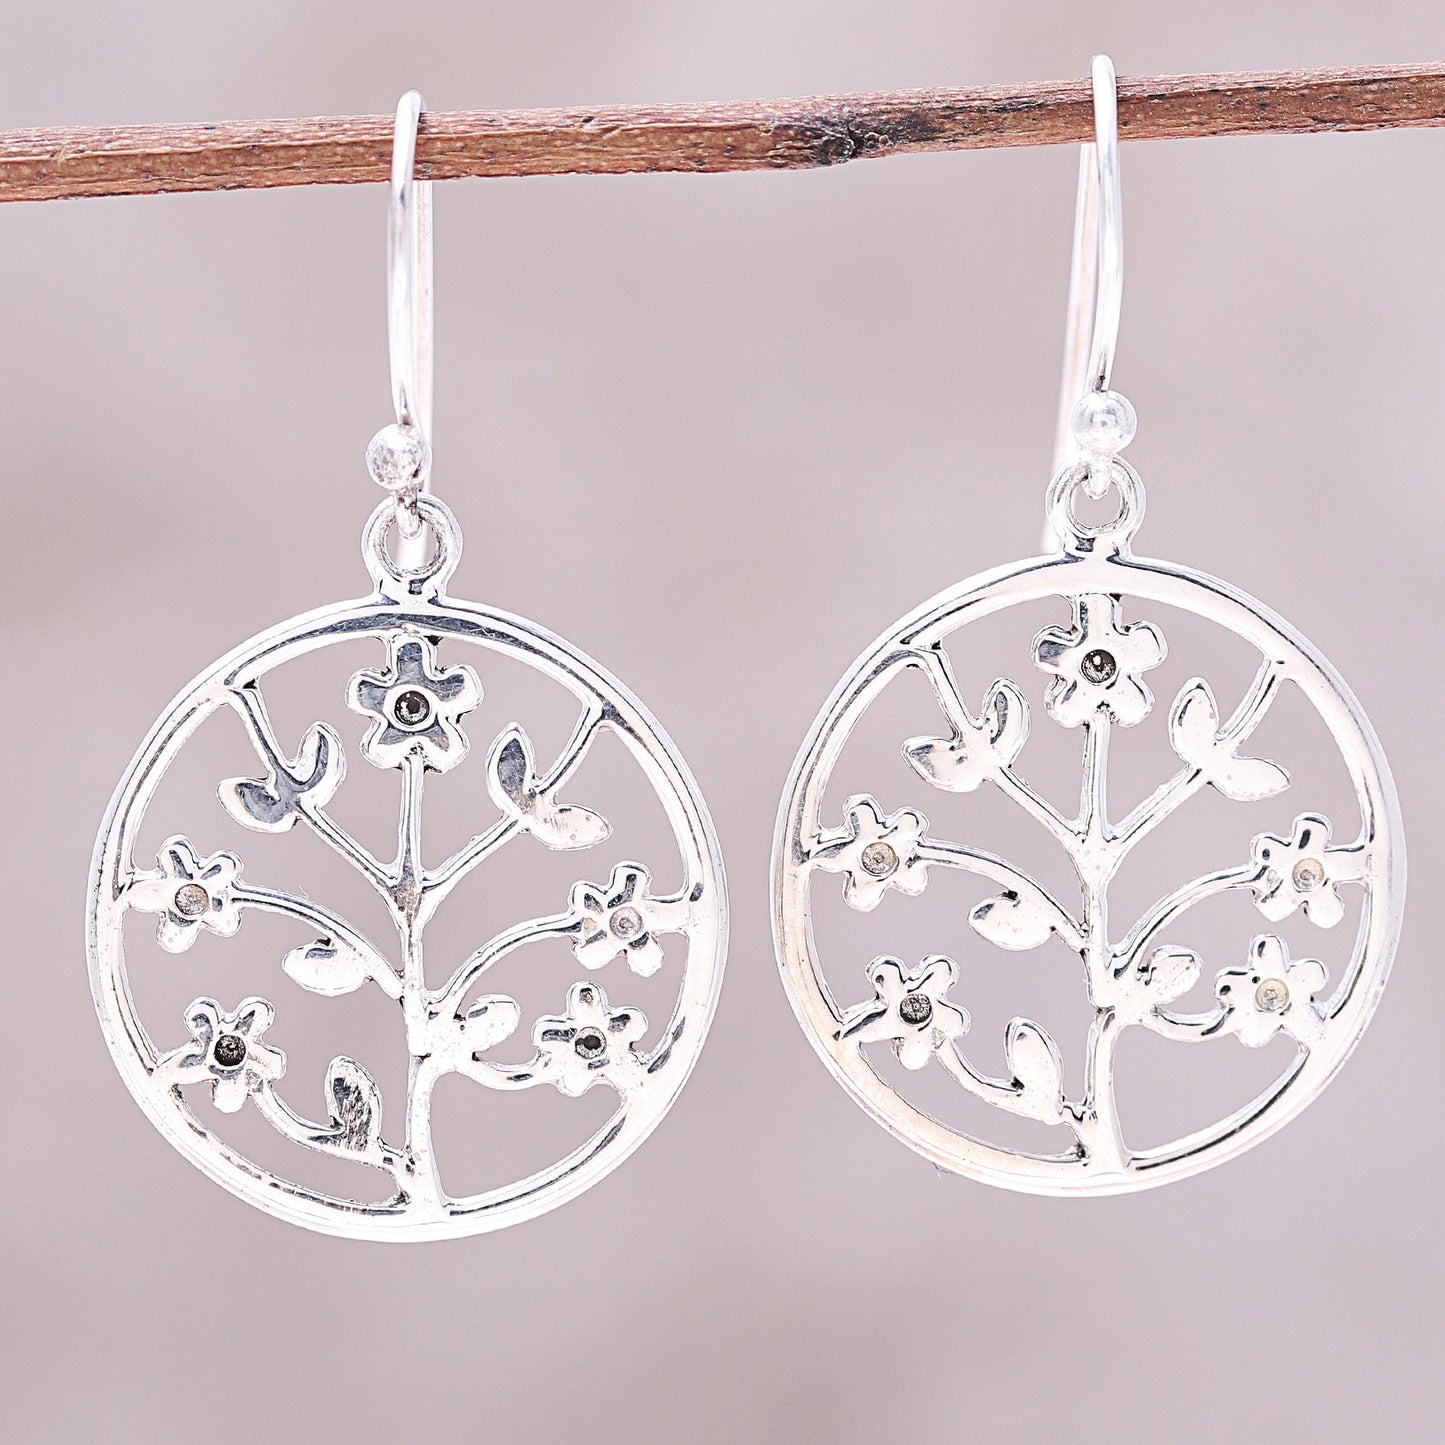 Floral Windows Openwork Floral Sterling Silver Dangle Earrings from India